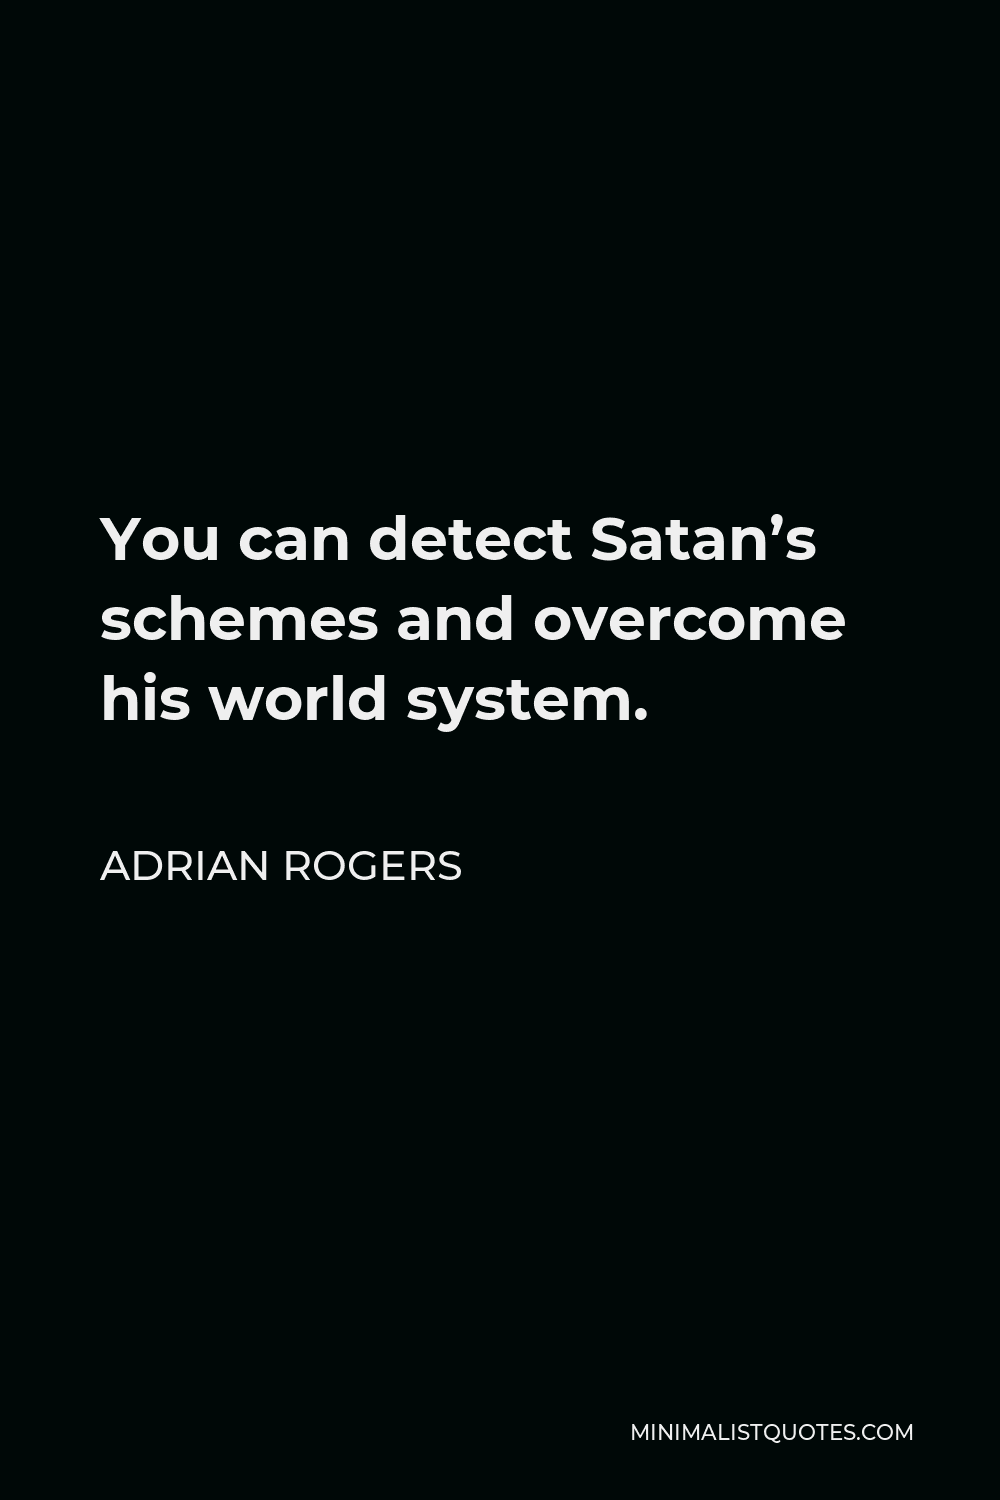 Adrian Rogers Quote - You can detect Satan’s schemes and overcome his world system.